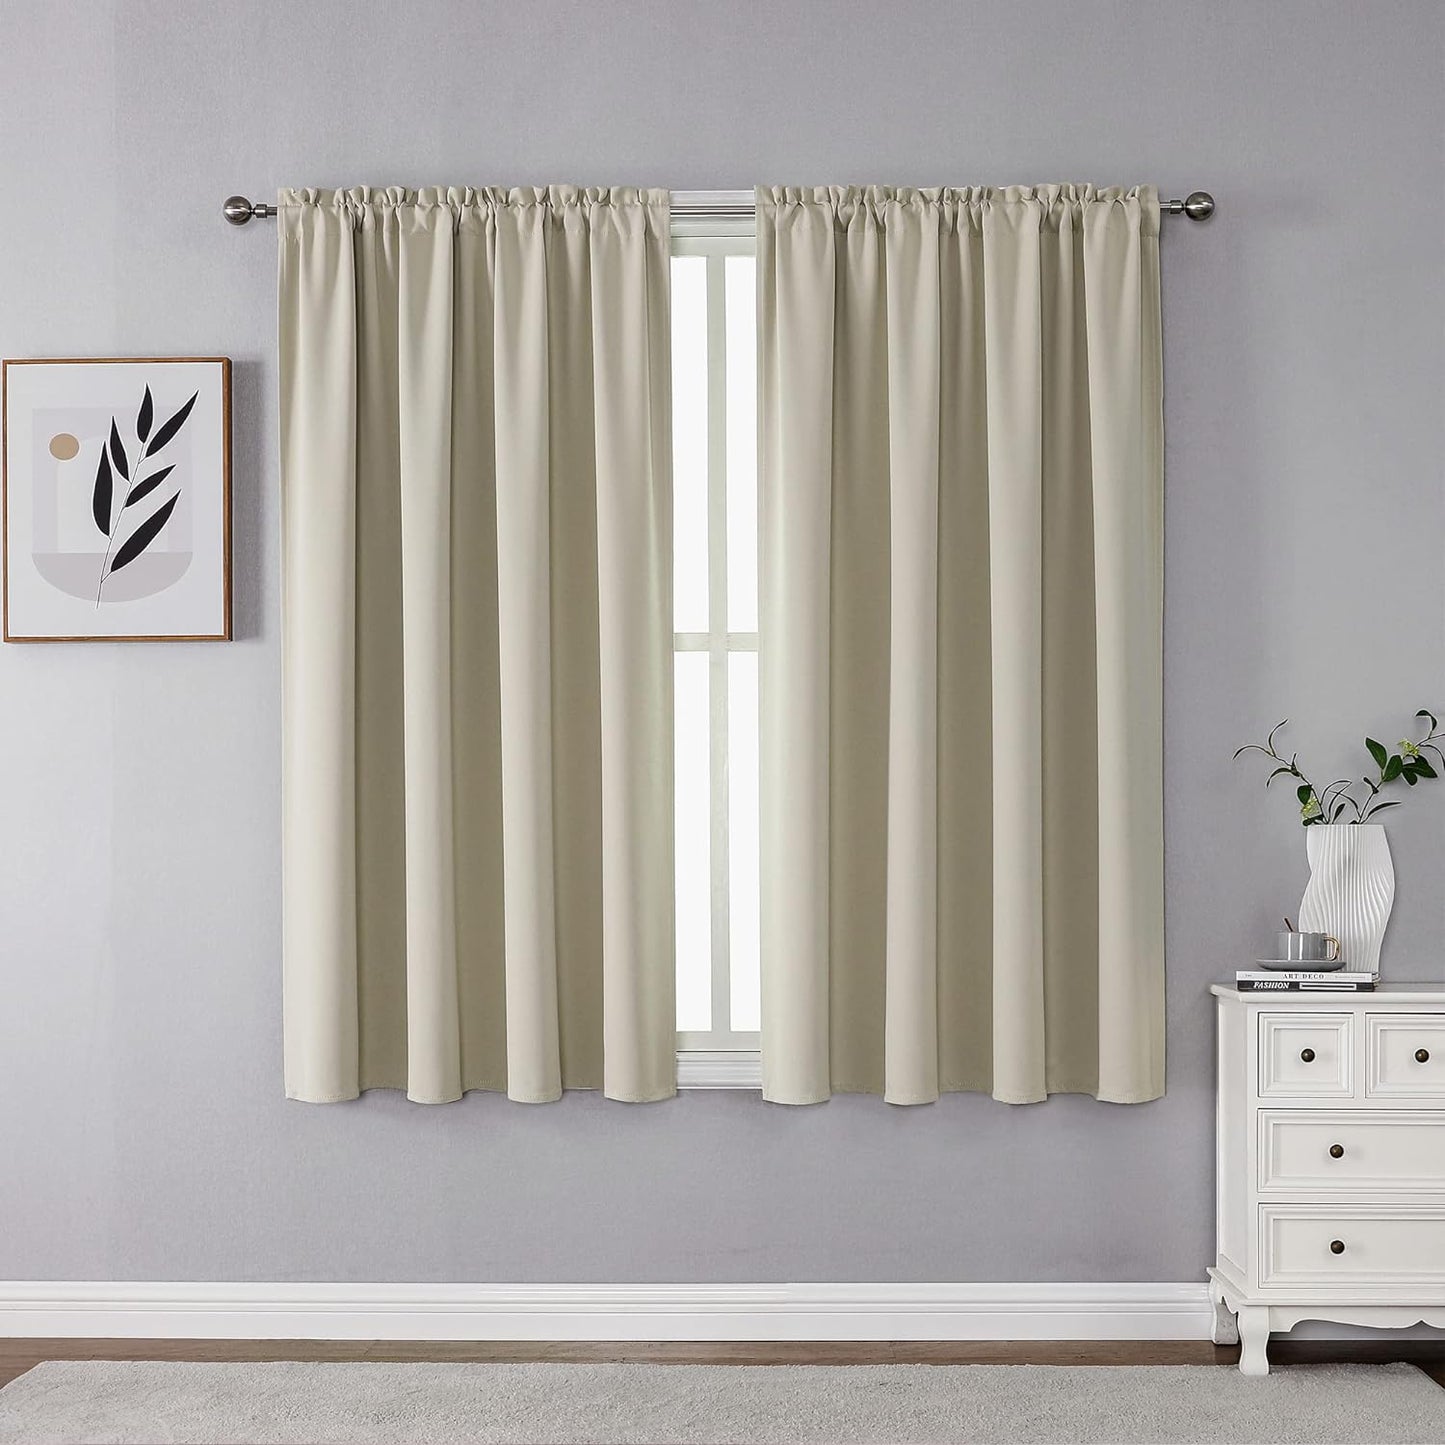 CUCRAF Blackout Curtains 84 Inches Long for Living Room, Light Beige Room Darkening Window Curtain Panels, Rod Pocket Thermal Insulated Solid Drapes for Bedroom, 52X84 Inch, Set of 2 Panels  CUCRAF Light Beige 52W X 54L Inch 2 Panels 